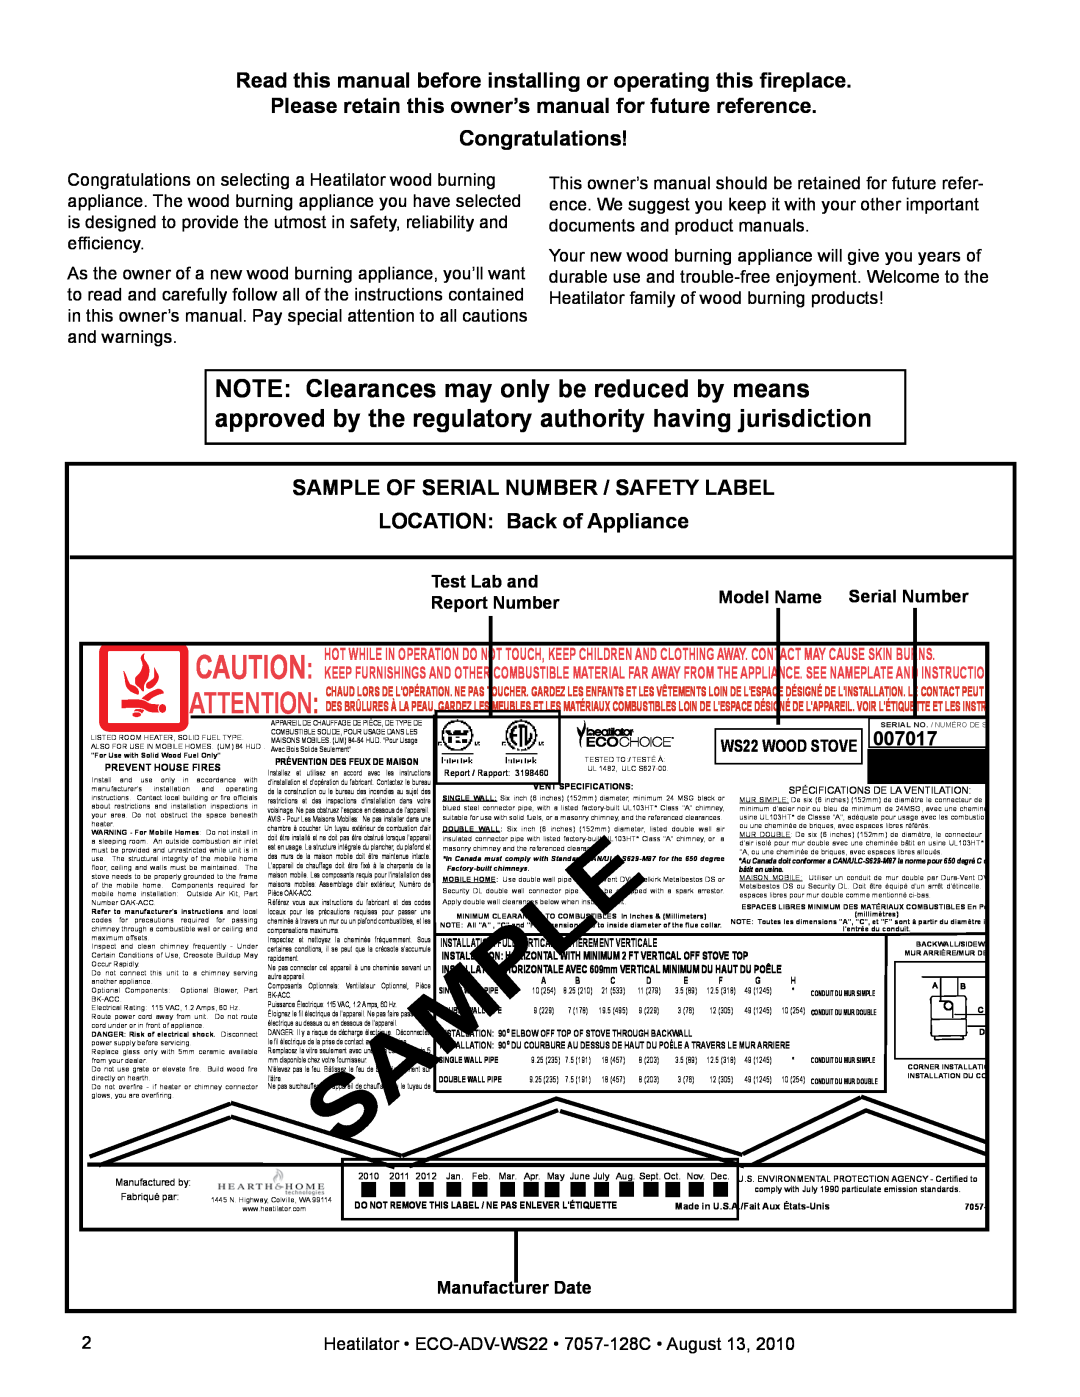 Heatiator ECO-ADV-WS22 Congratulations, Sample Of Serial Number / Safety Label, LOCATION Back of Appliance, Test Lab and 